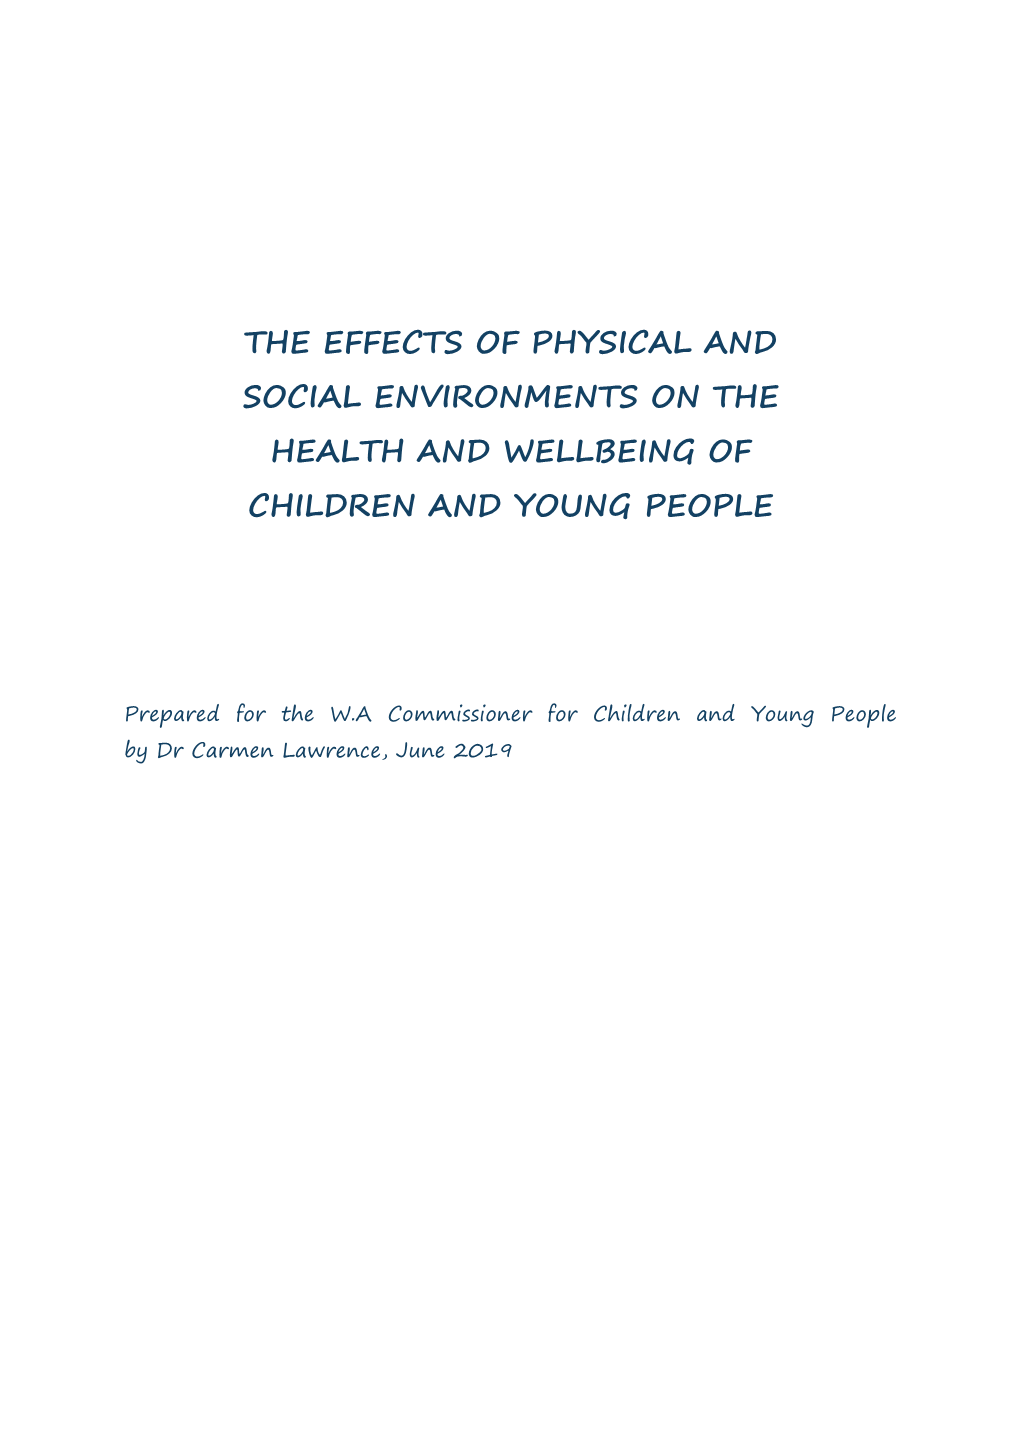 The Effects of Physical and Social Environments on the Health and Wellbeing of Children and Young People